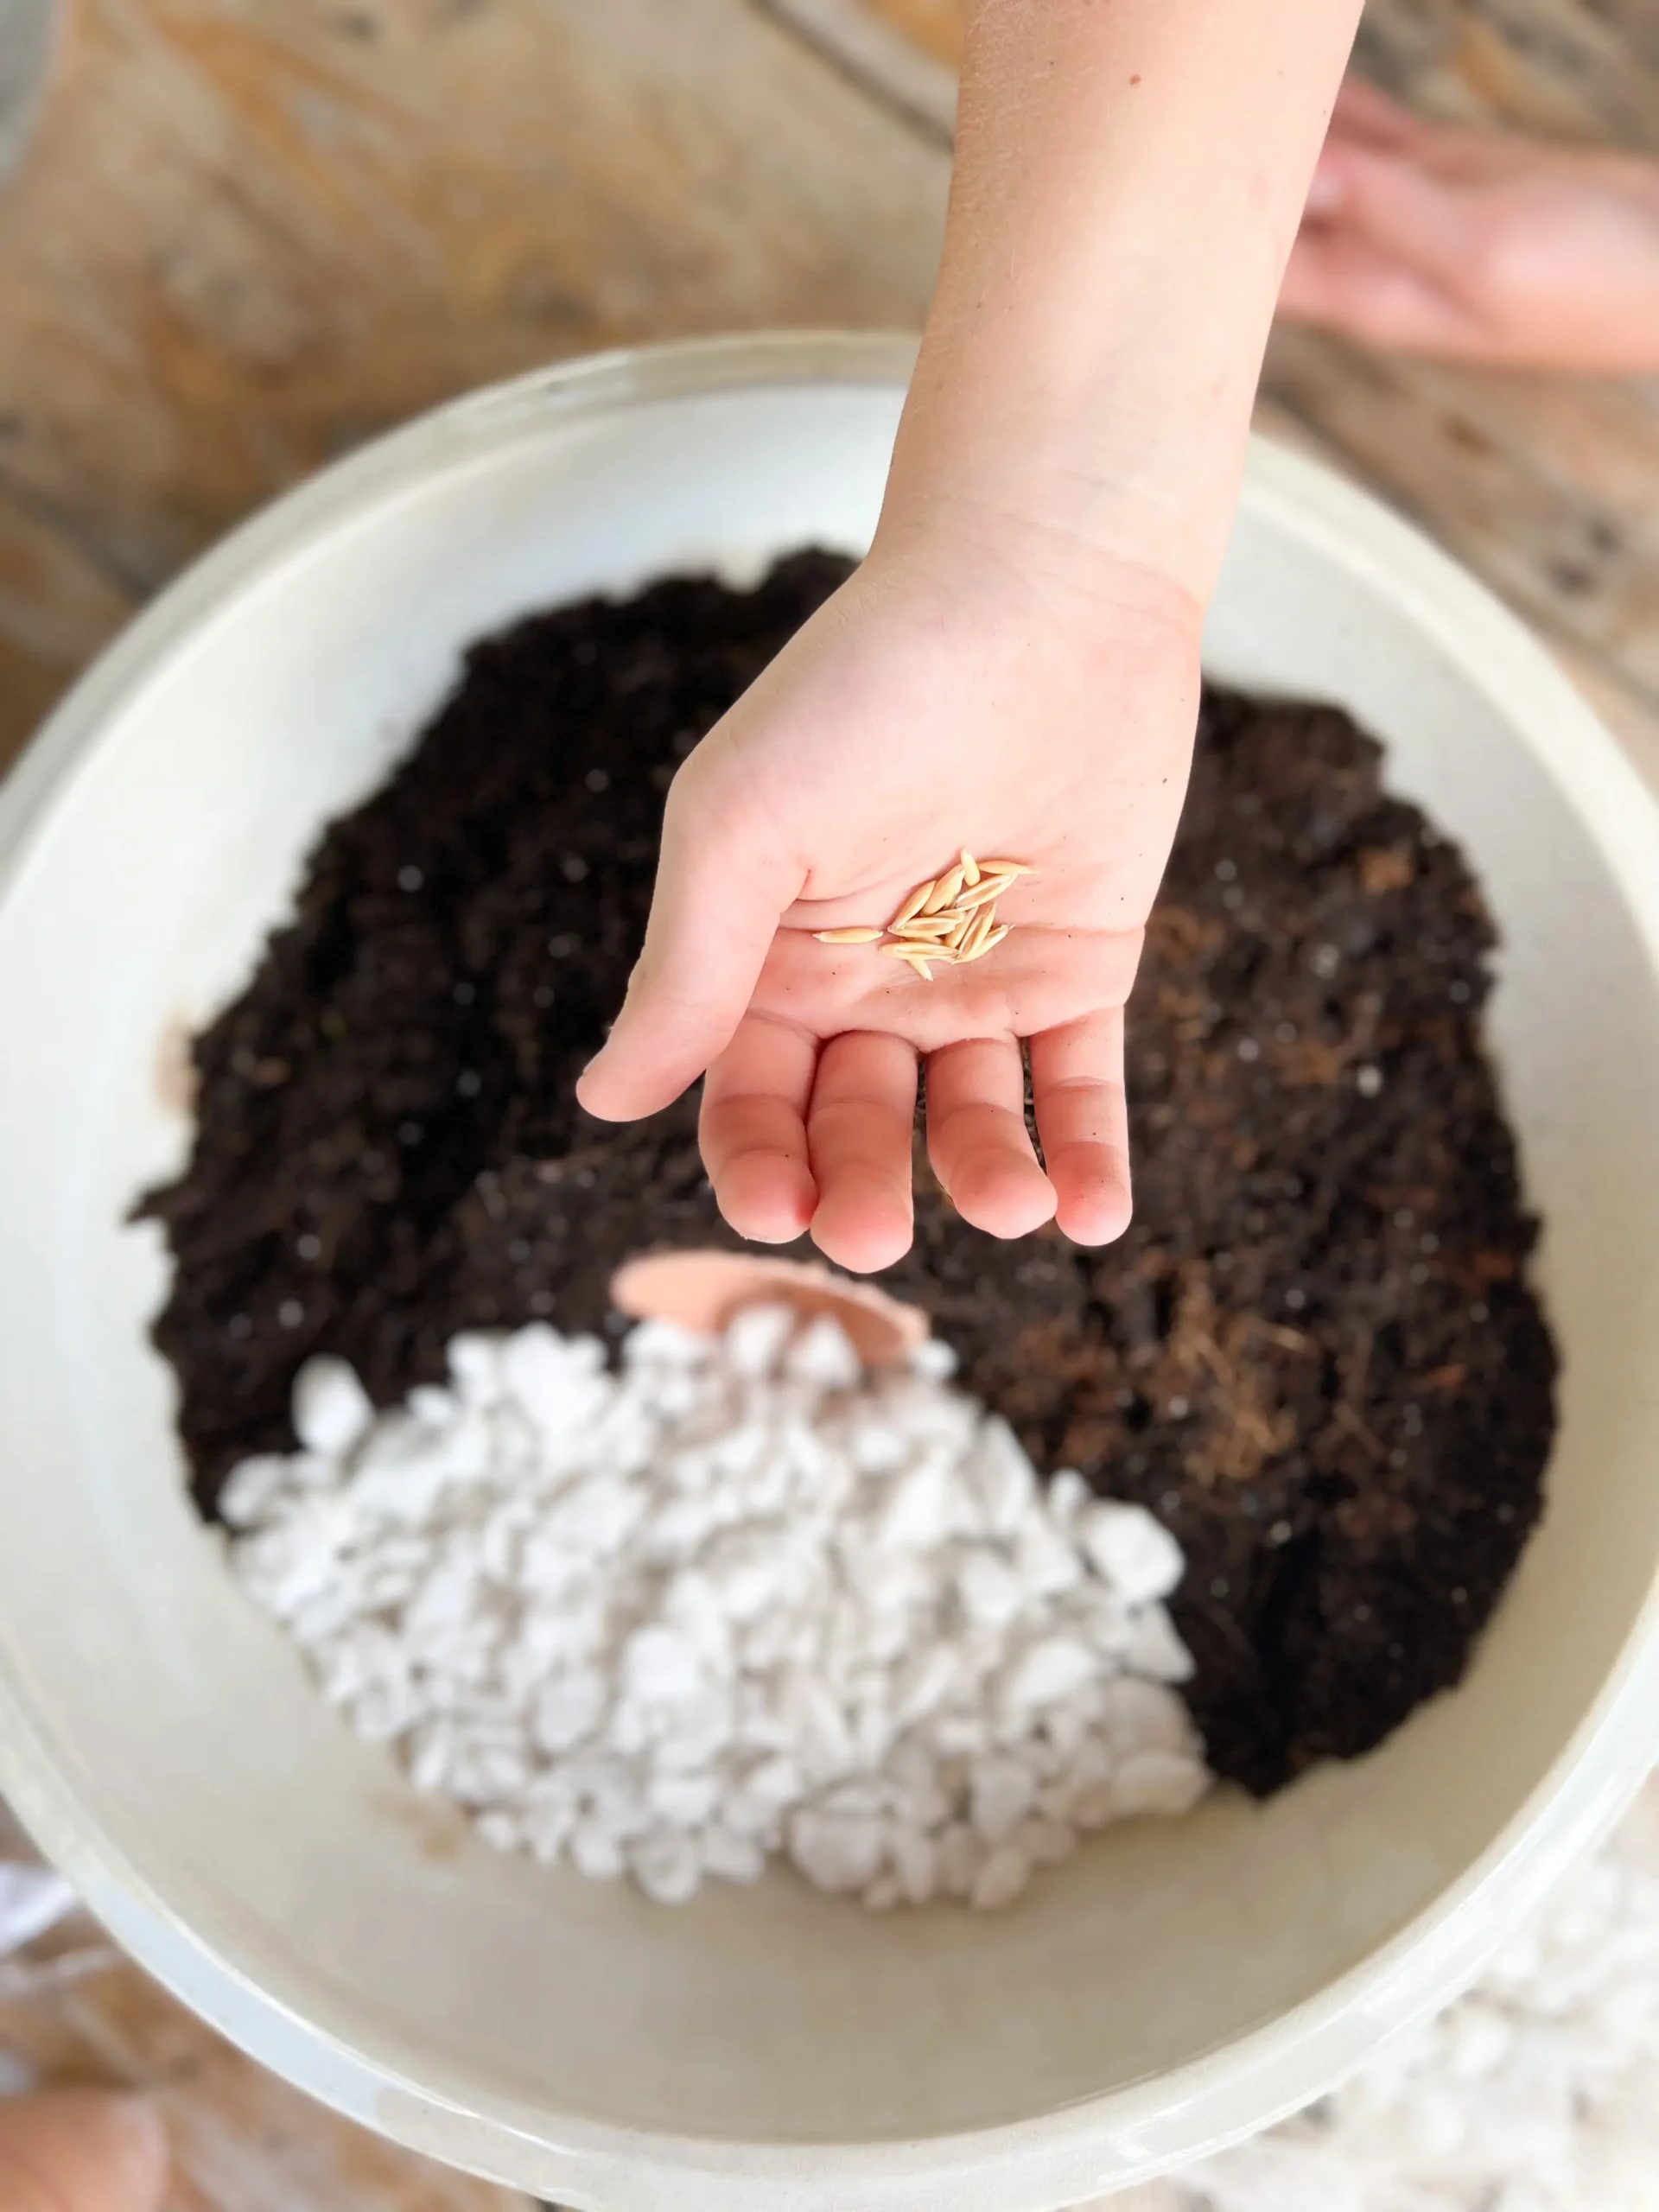 one of the kids holding seeds over the resurrection garden